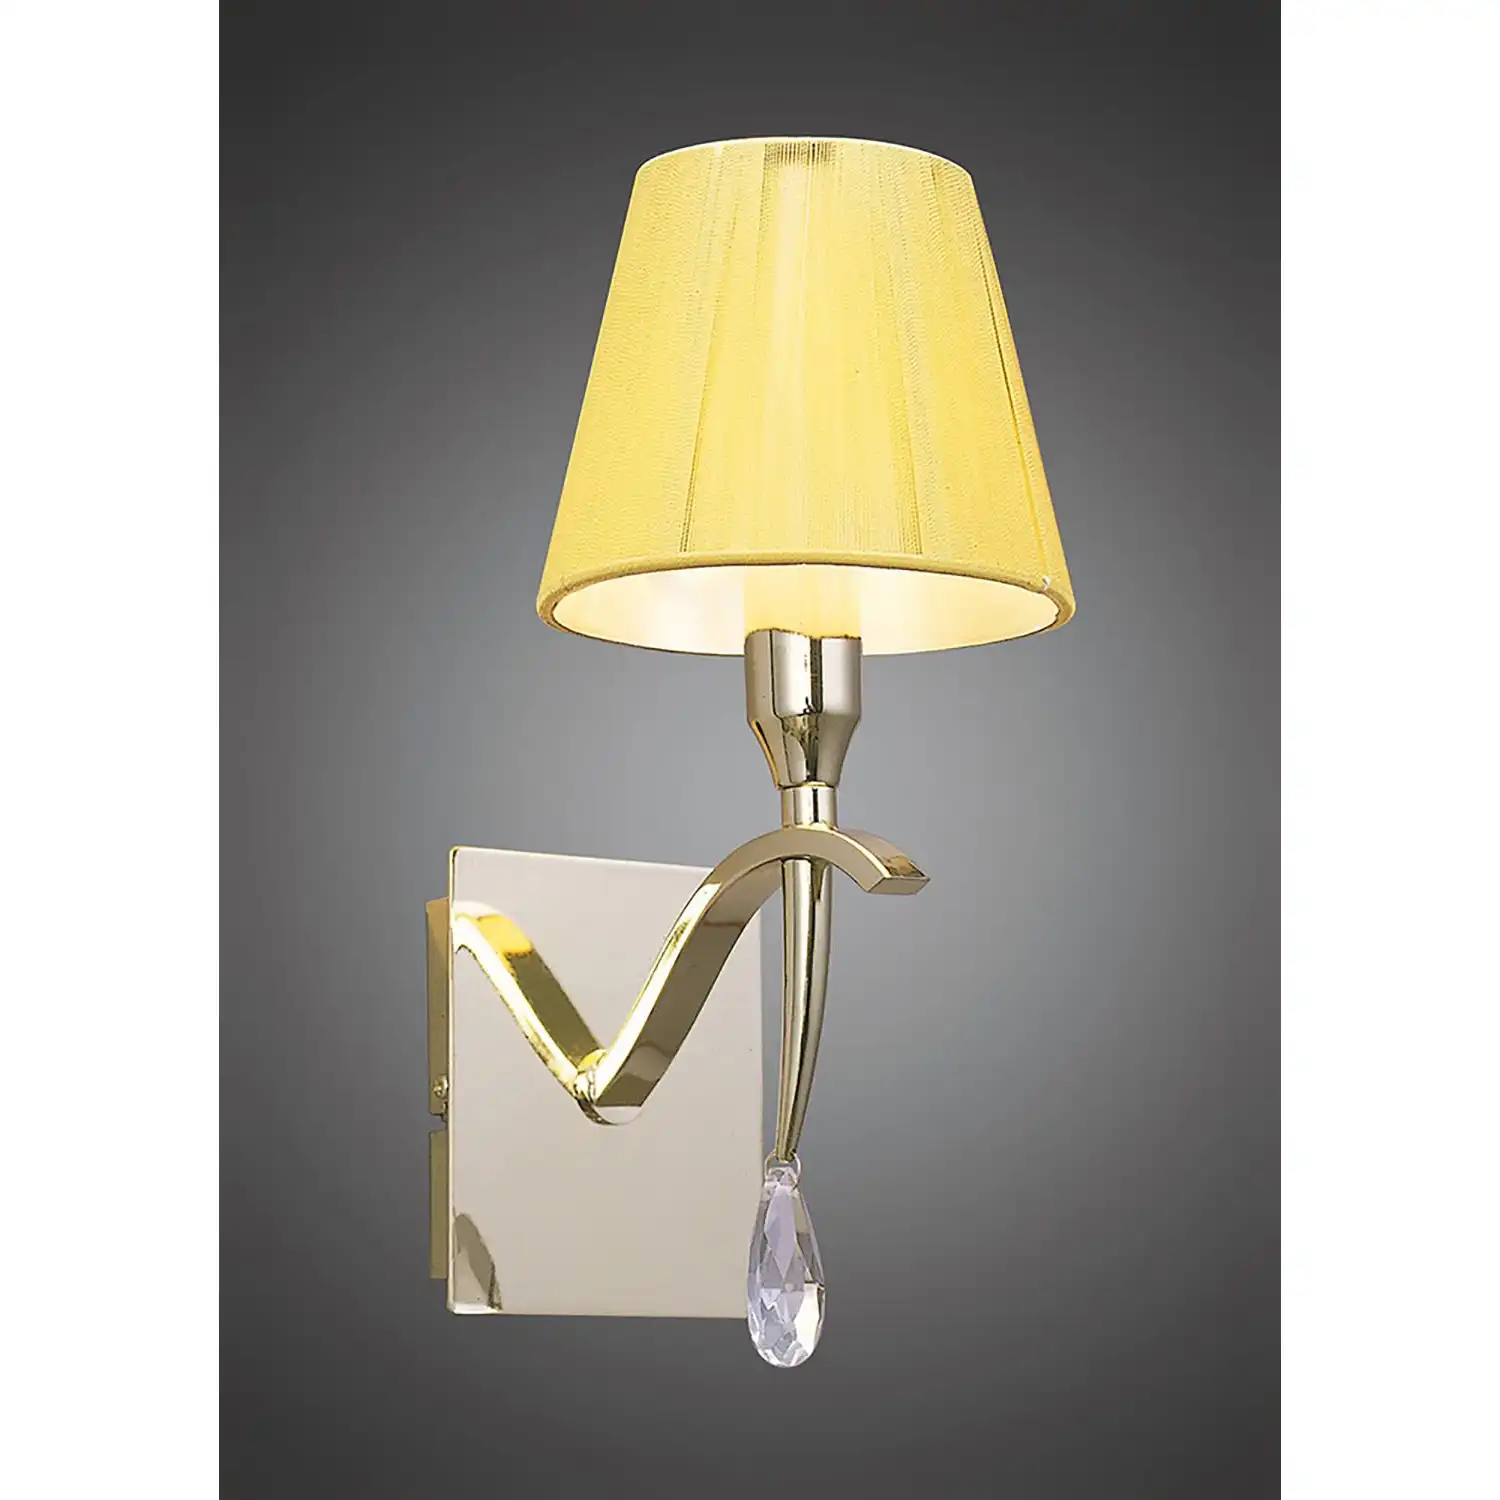 Siena Wall Lamp Switched 1 Light E14, Polished Brass With Amber Cream Shade And Clear Crystal